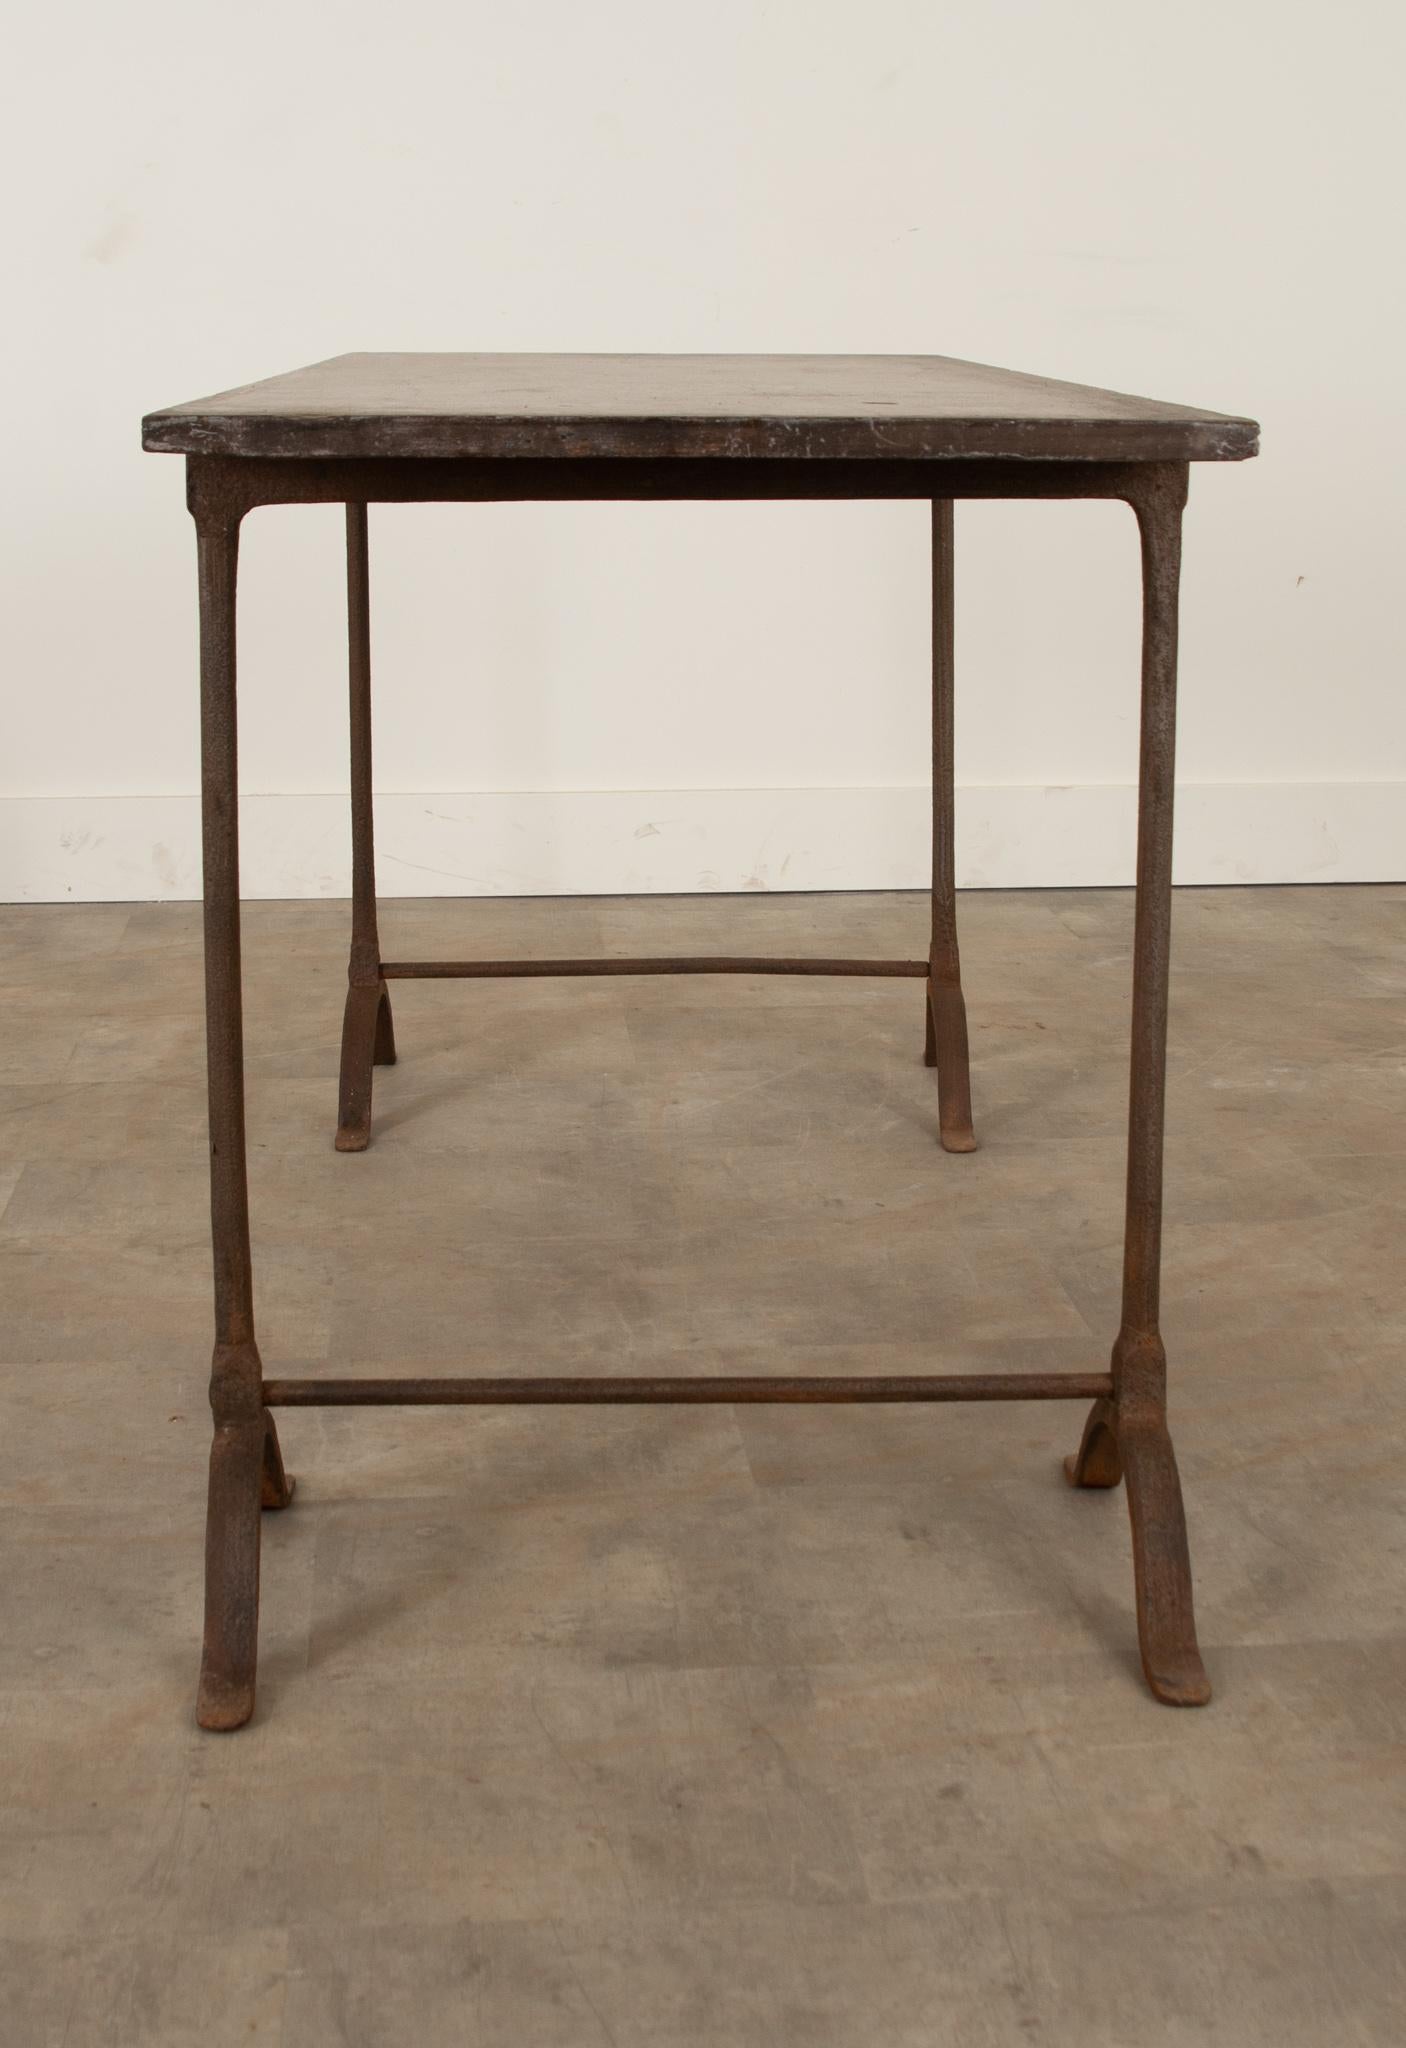 English 19th Century Iron & Slate Work Table For Sale 3